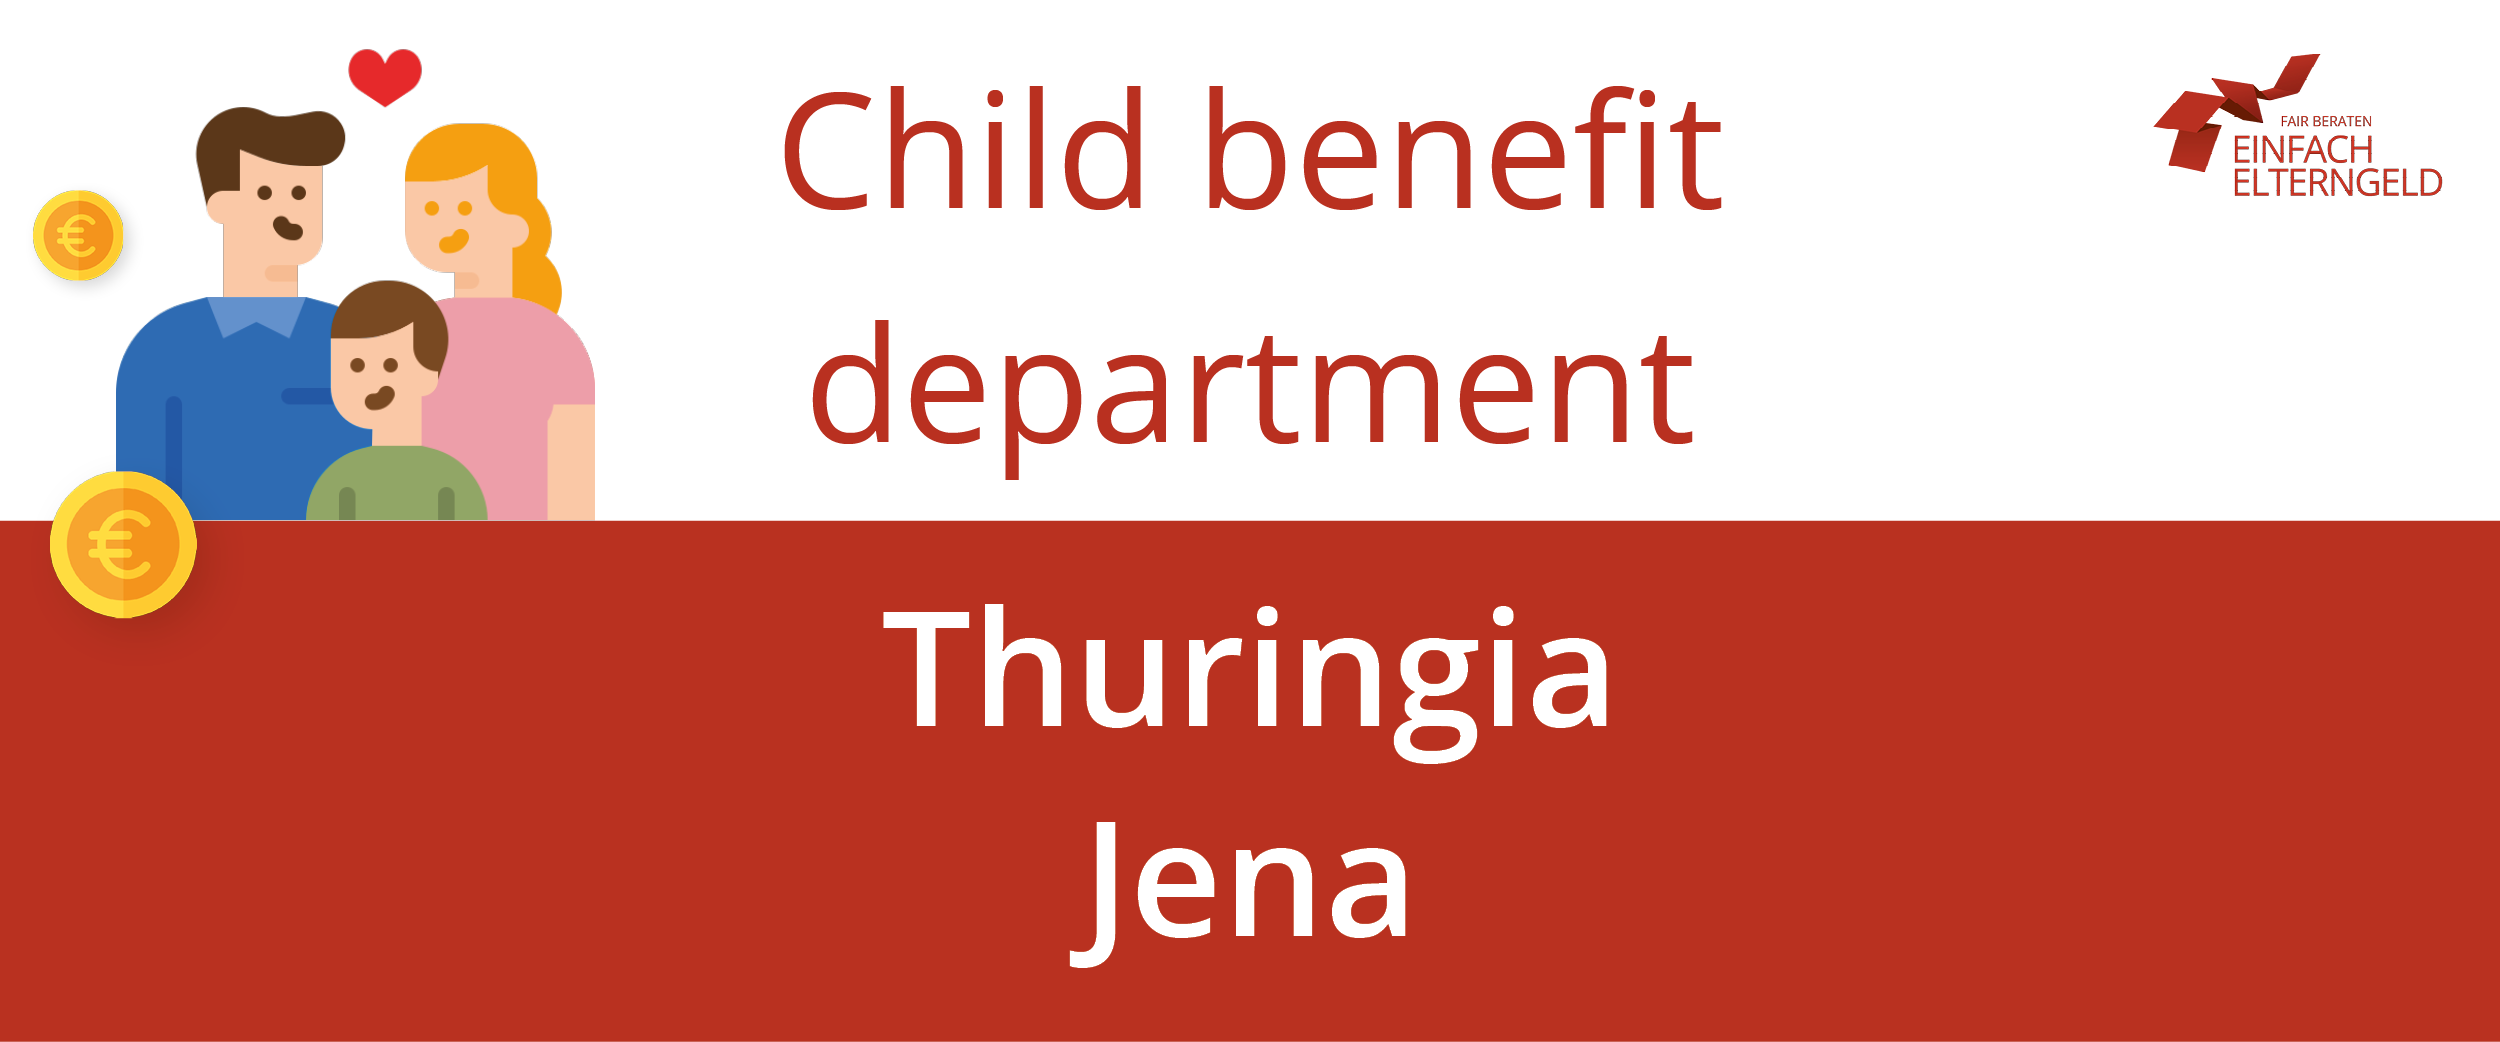 We present you the Child benefit department Thuringia Jena.